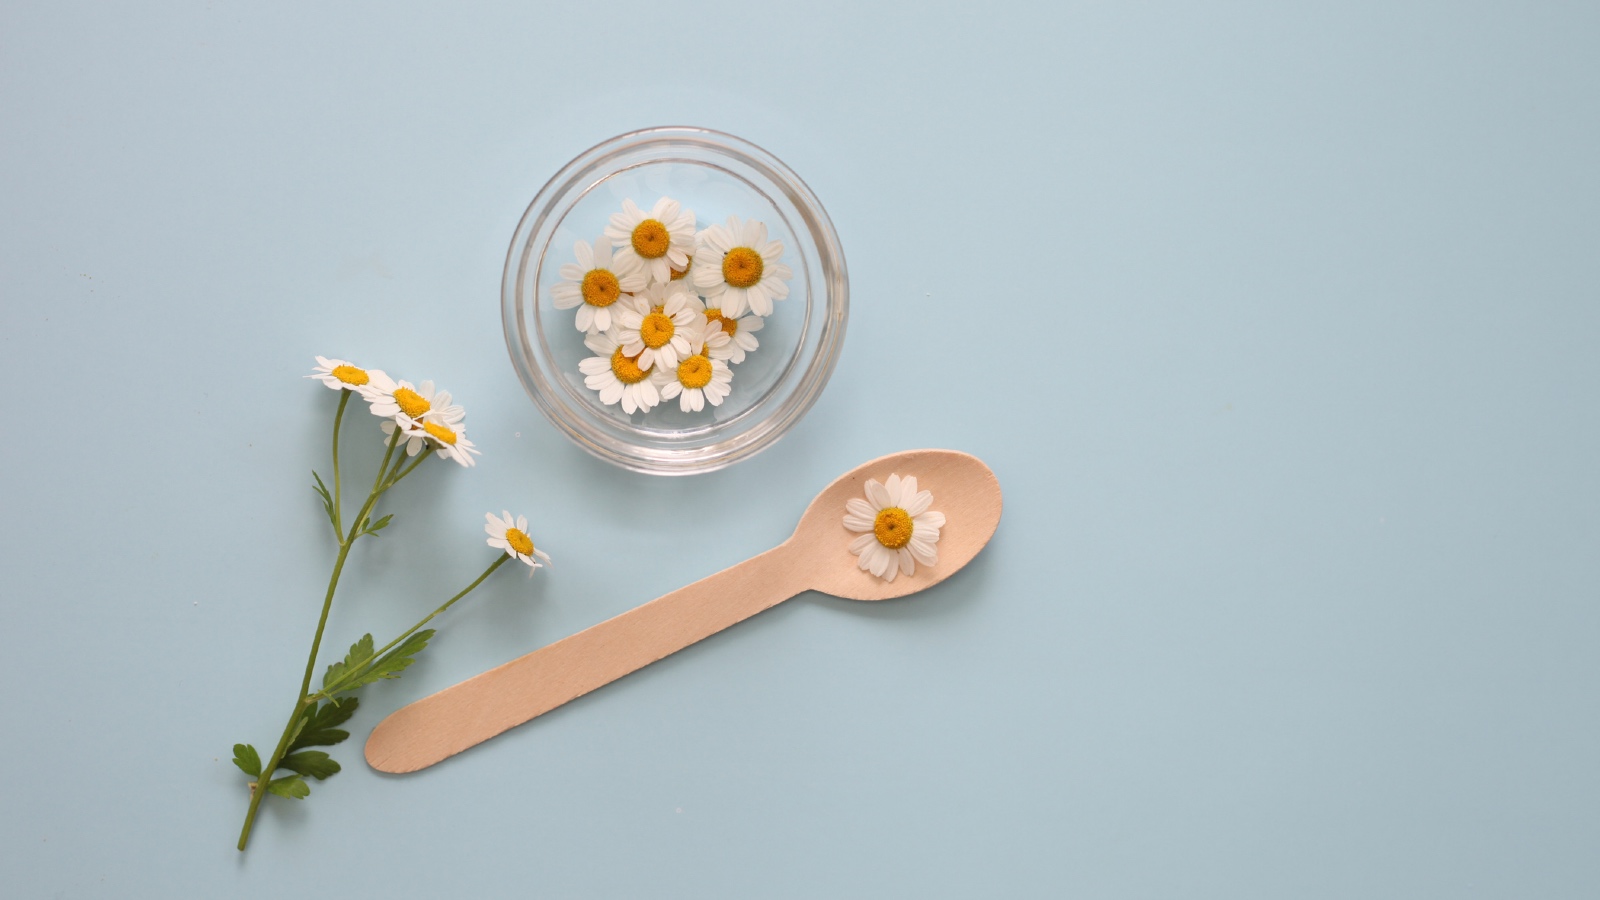 Chamomile plants in a bowl with a spoon